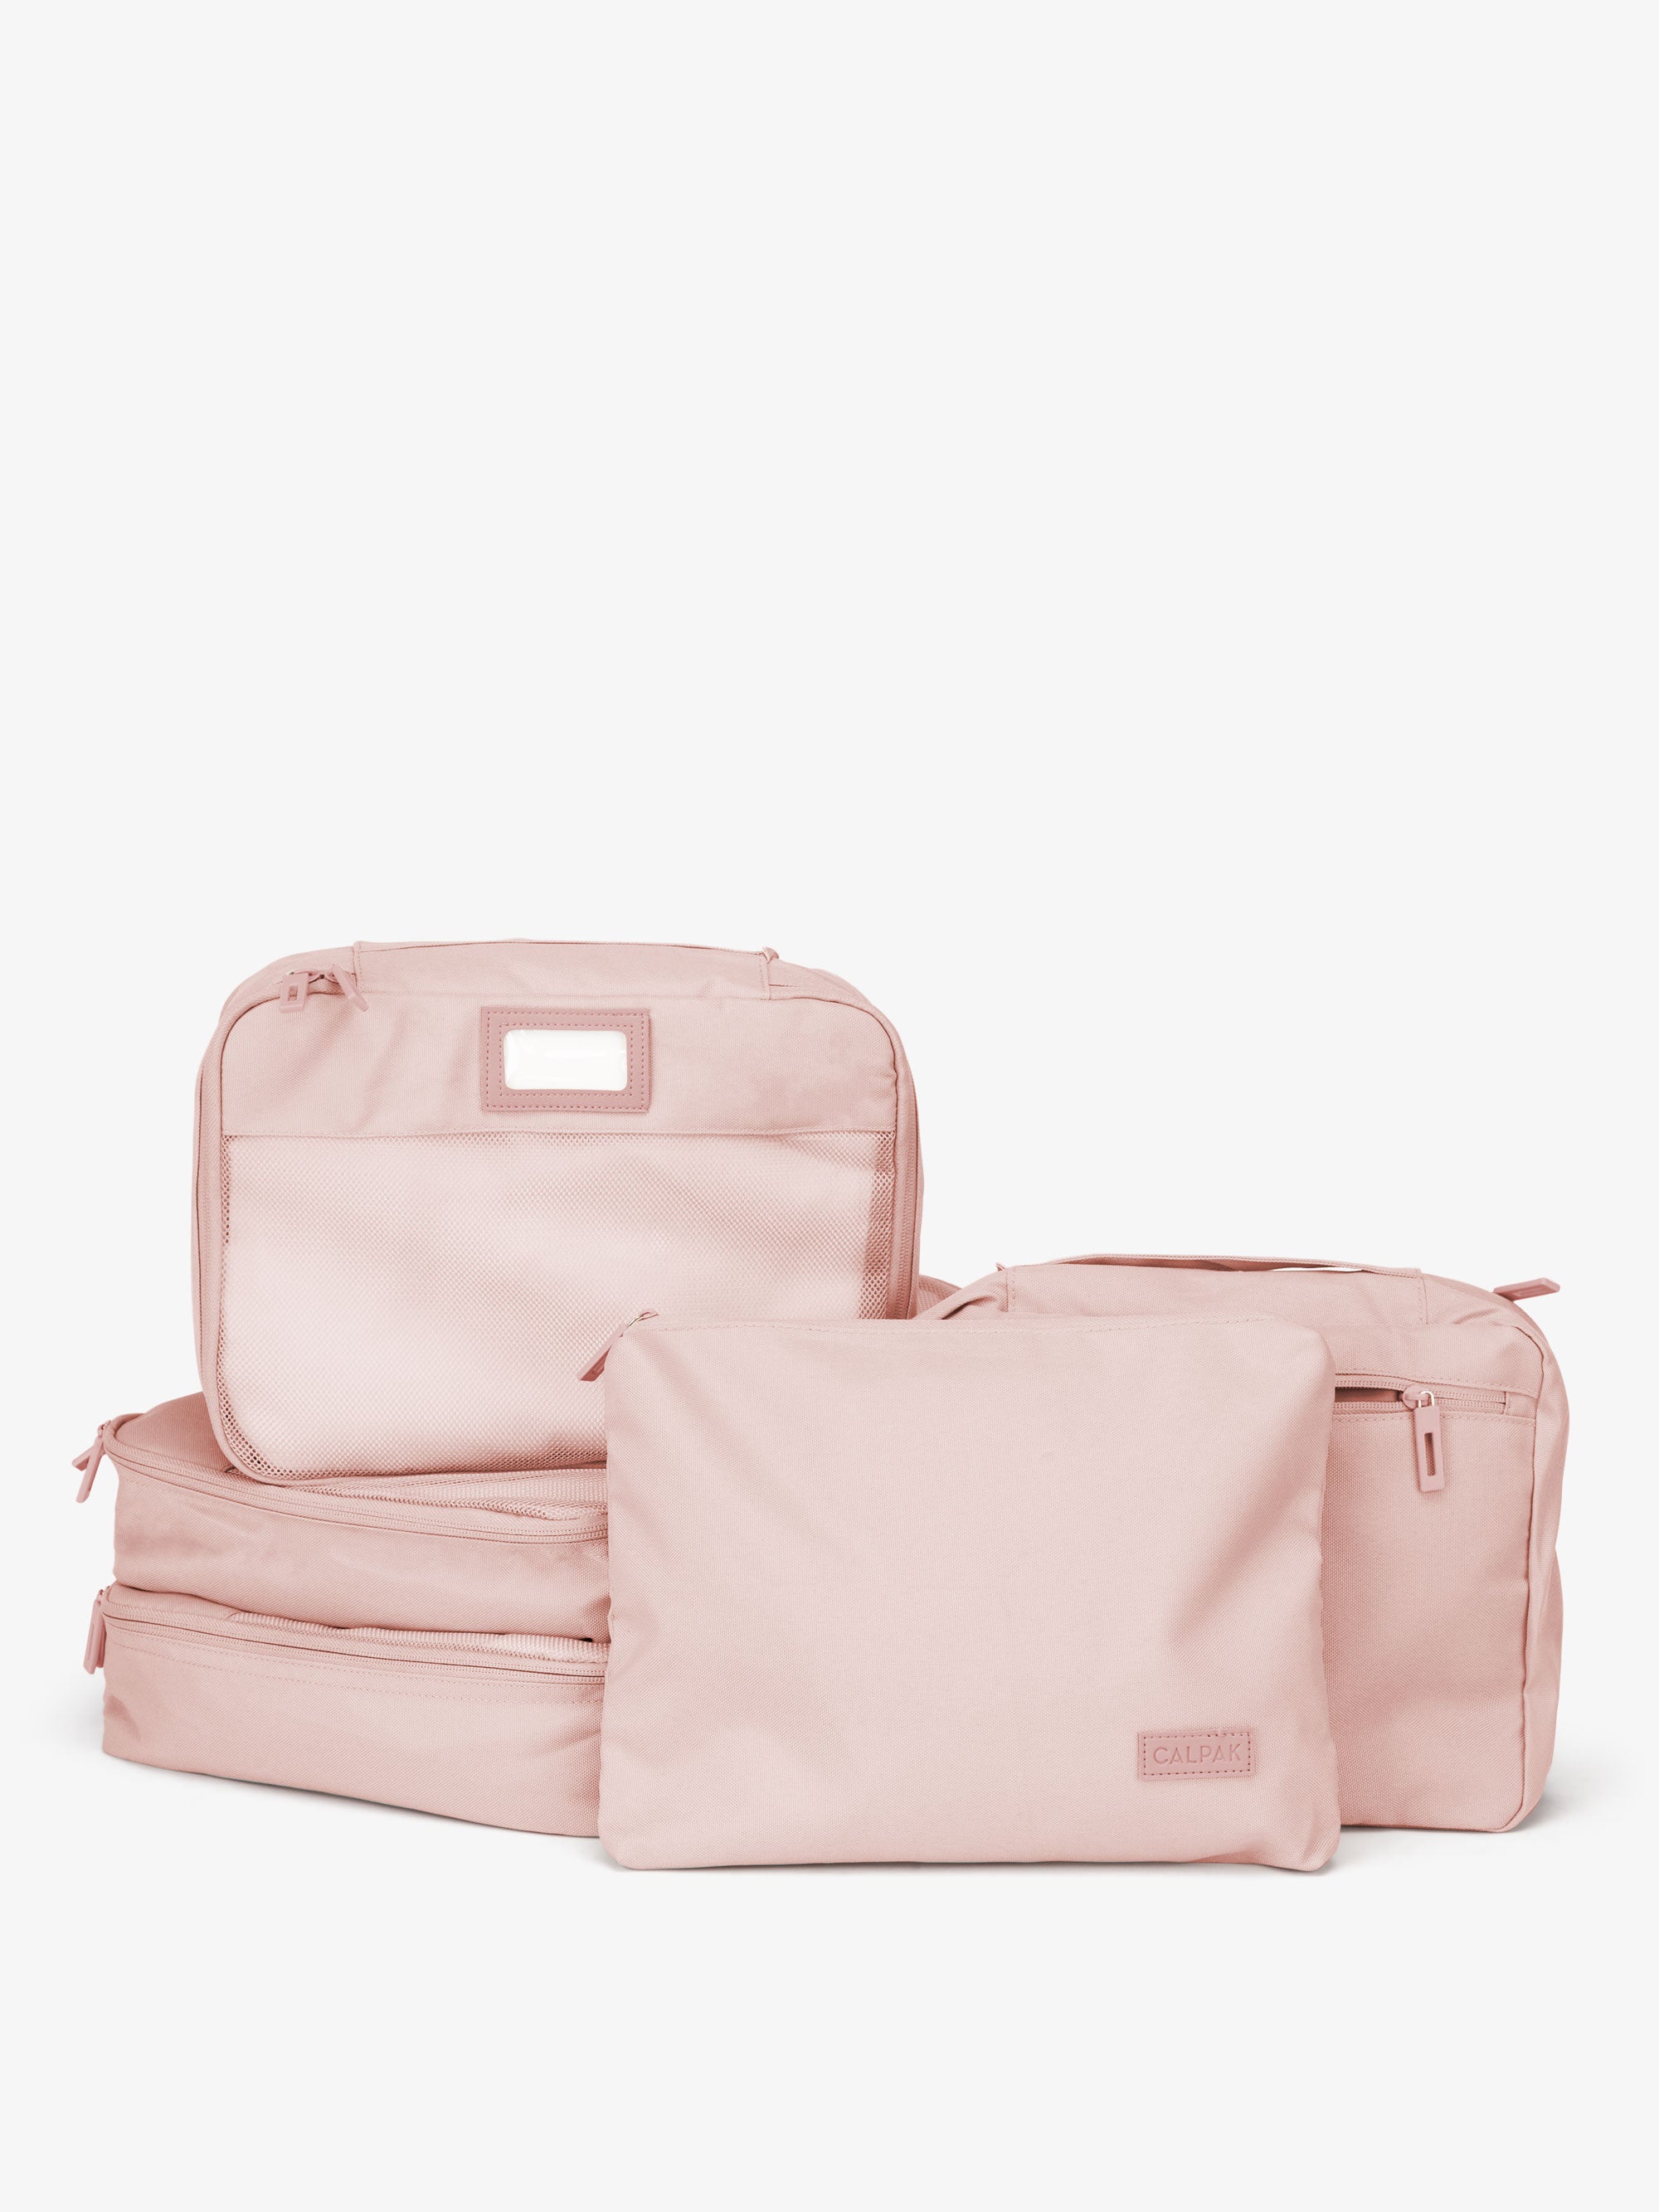 Travel packing cubes in pink